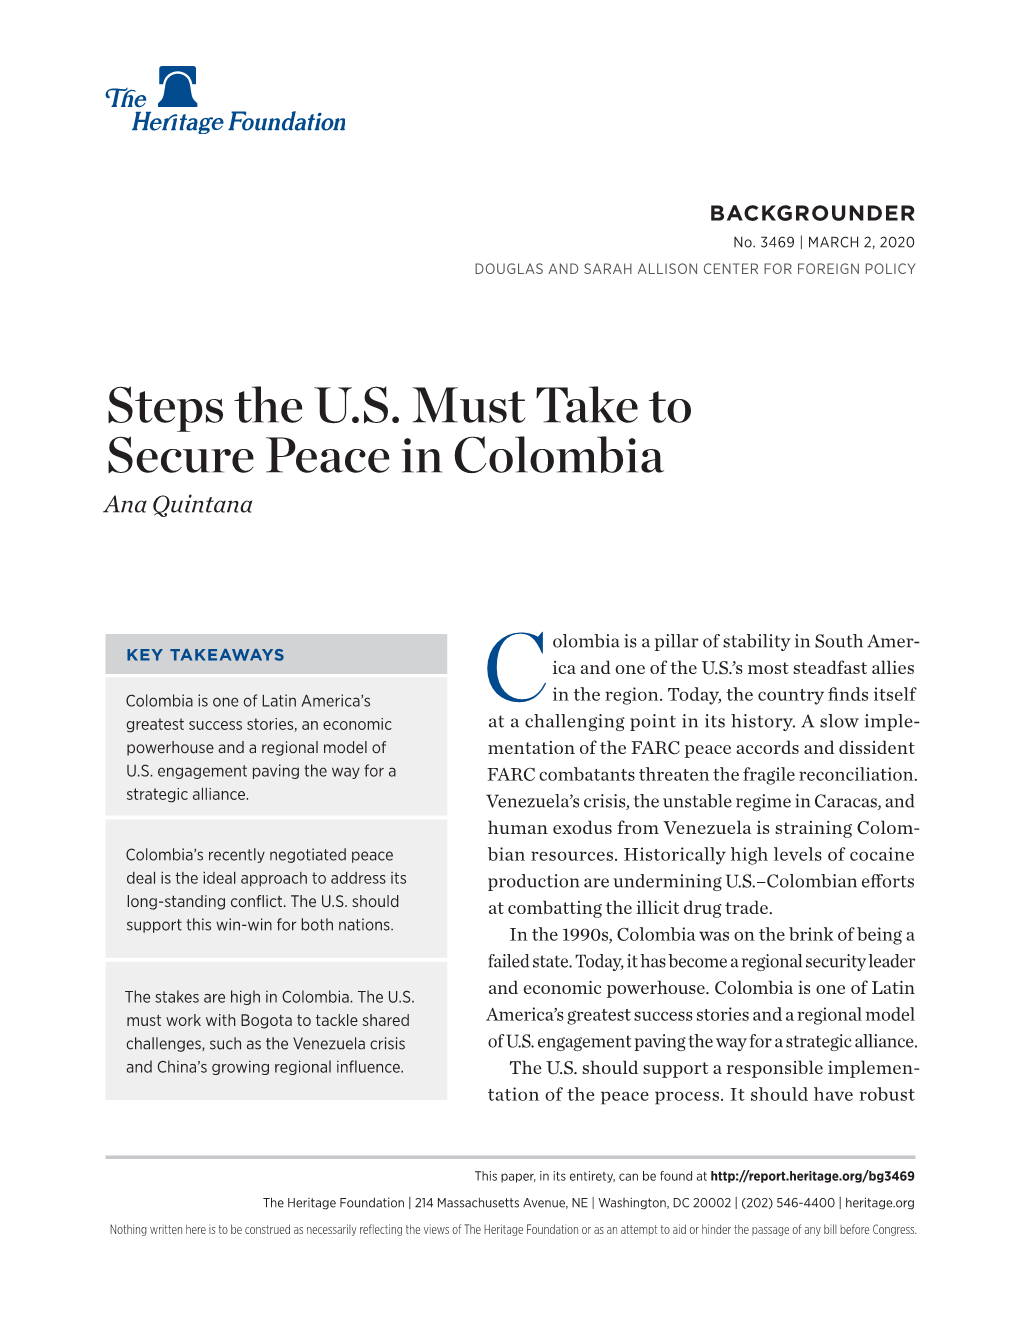 Steps the U.S. Must Take to Secure Peace in Colombia Ana Quintana